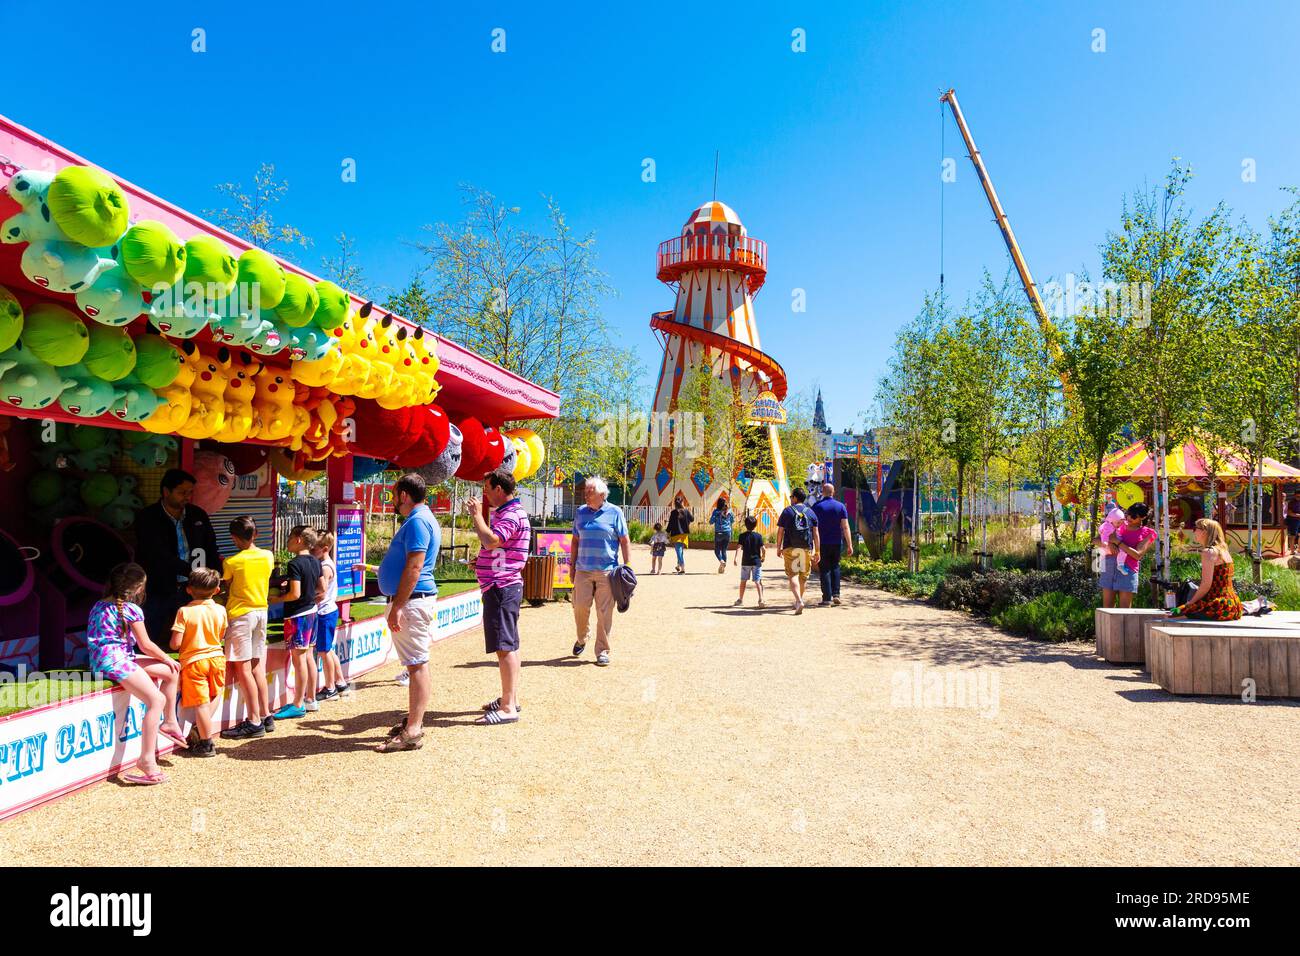 People at Dreamland amusement park and Helter Skelter ride in background, Margate, Kent, England Stock Photo